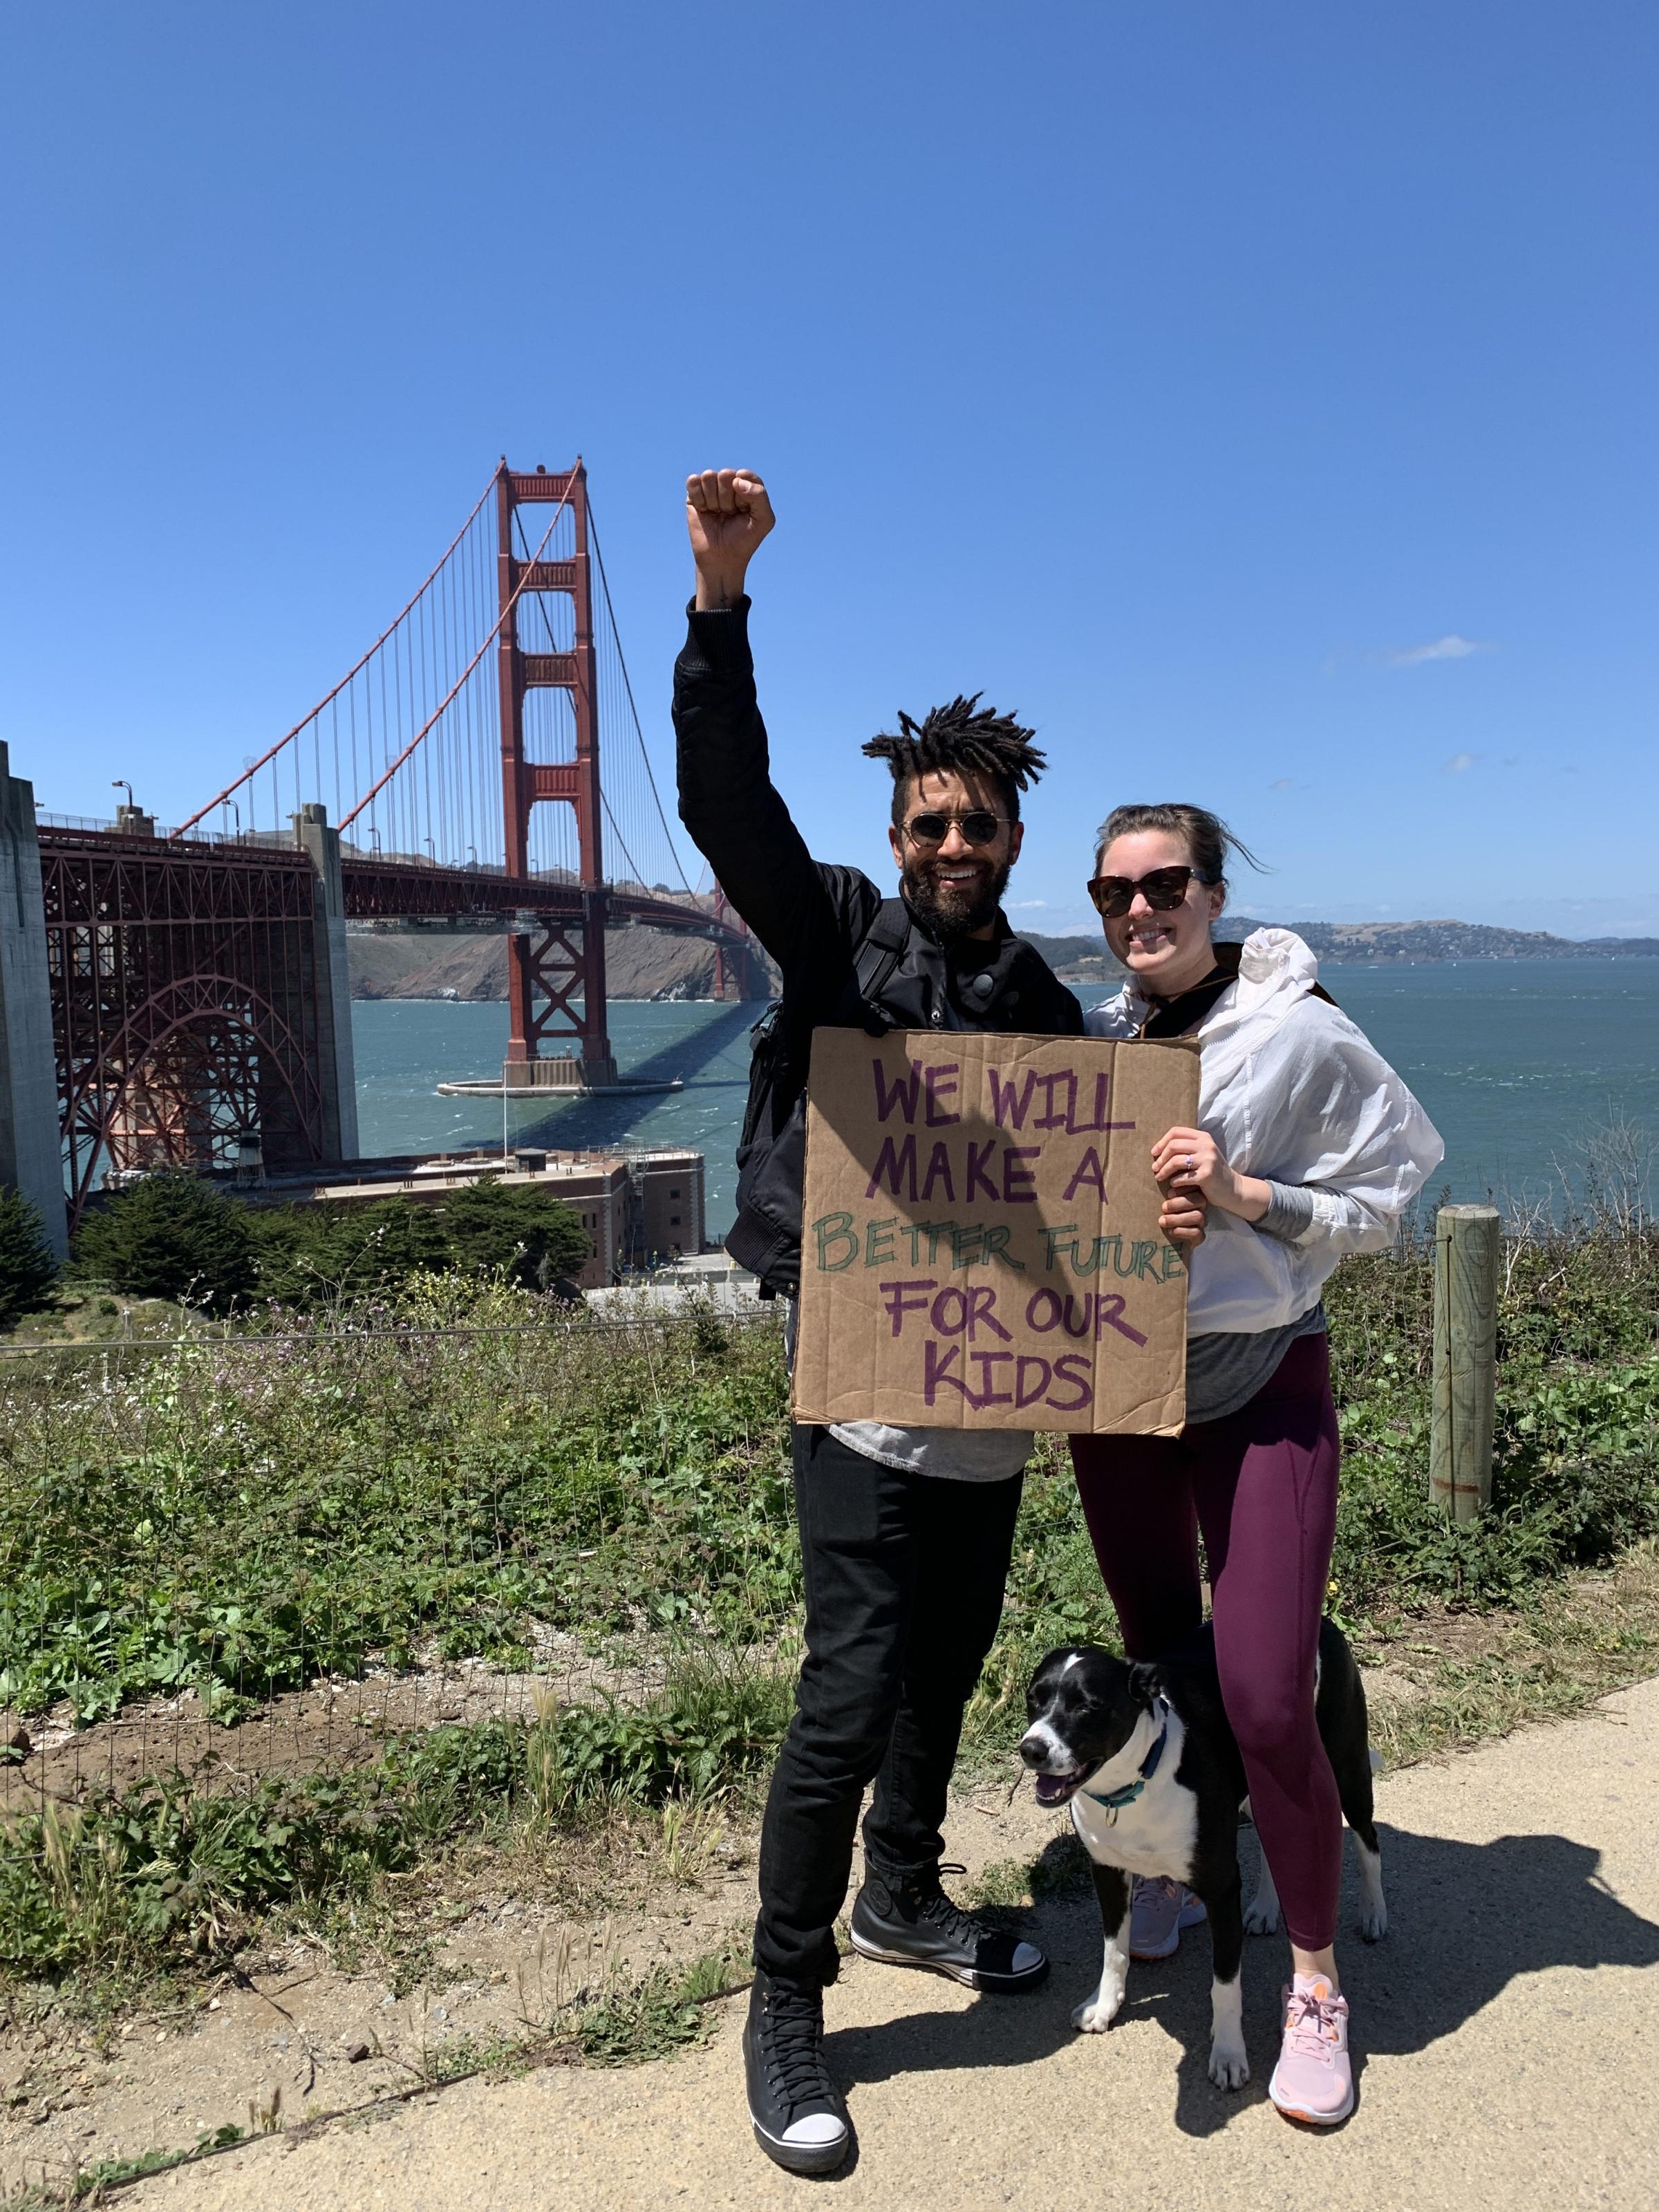 Quin Messenger and Carrie Montgomery at a Black Lives Matter protest in San Francisco on June 6, 2020.